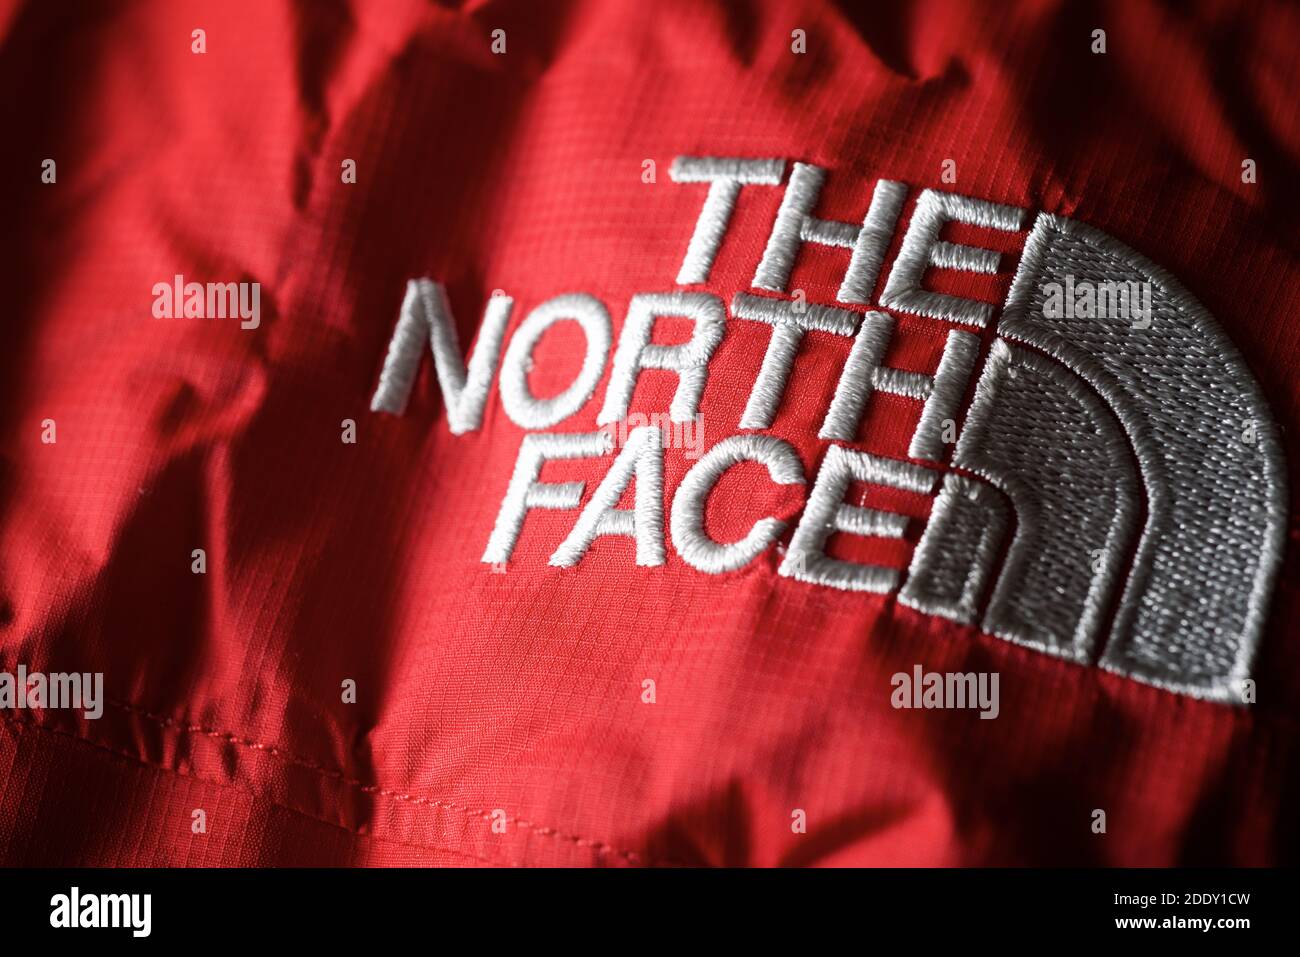 North face logo hi-res stock photography and images - Alamy